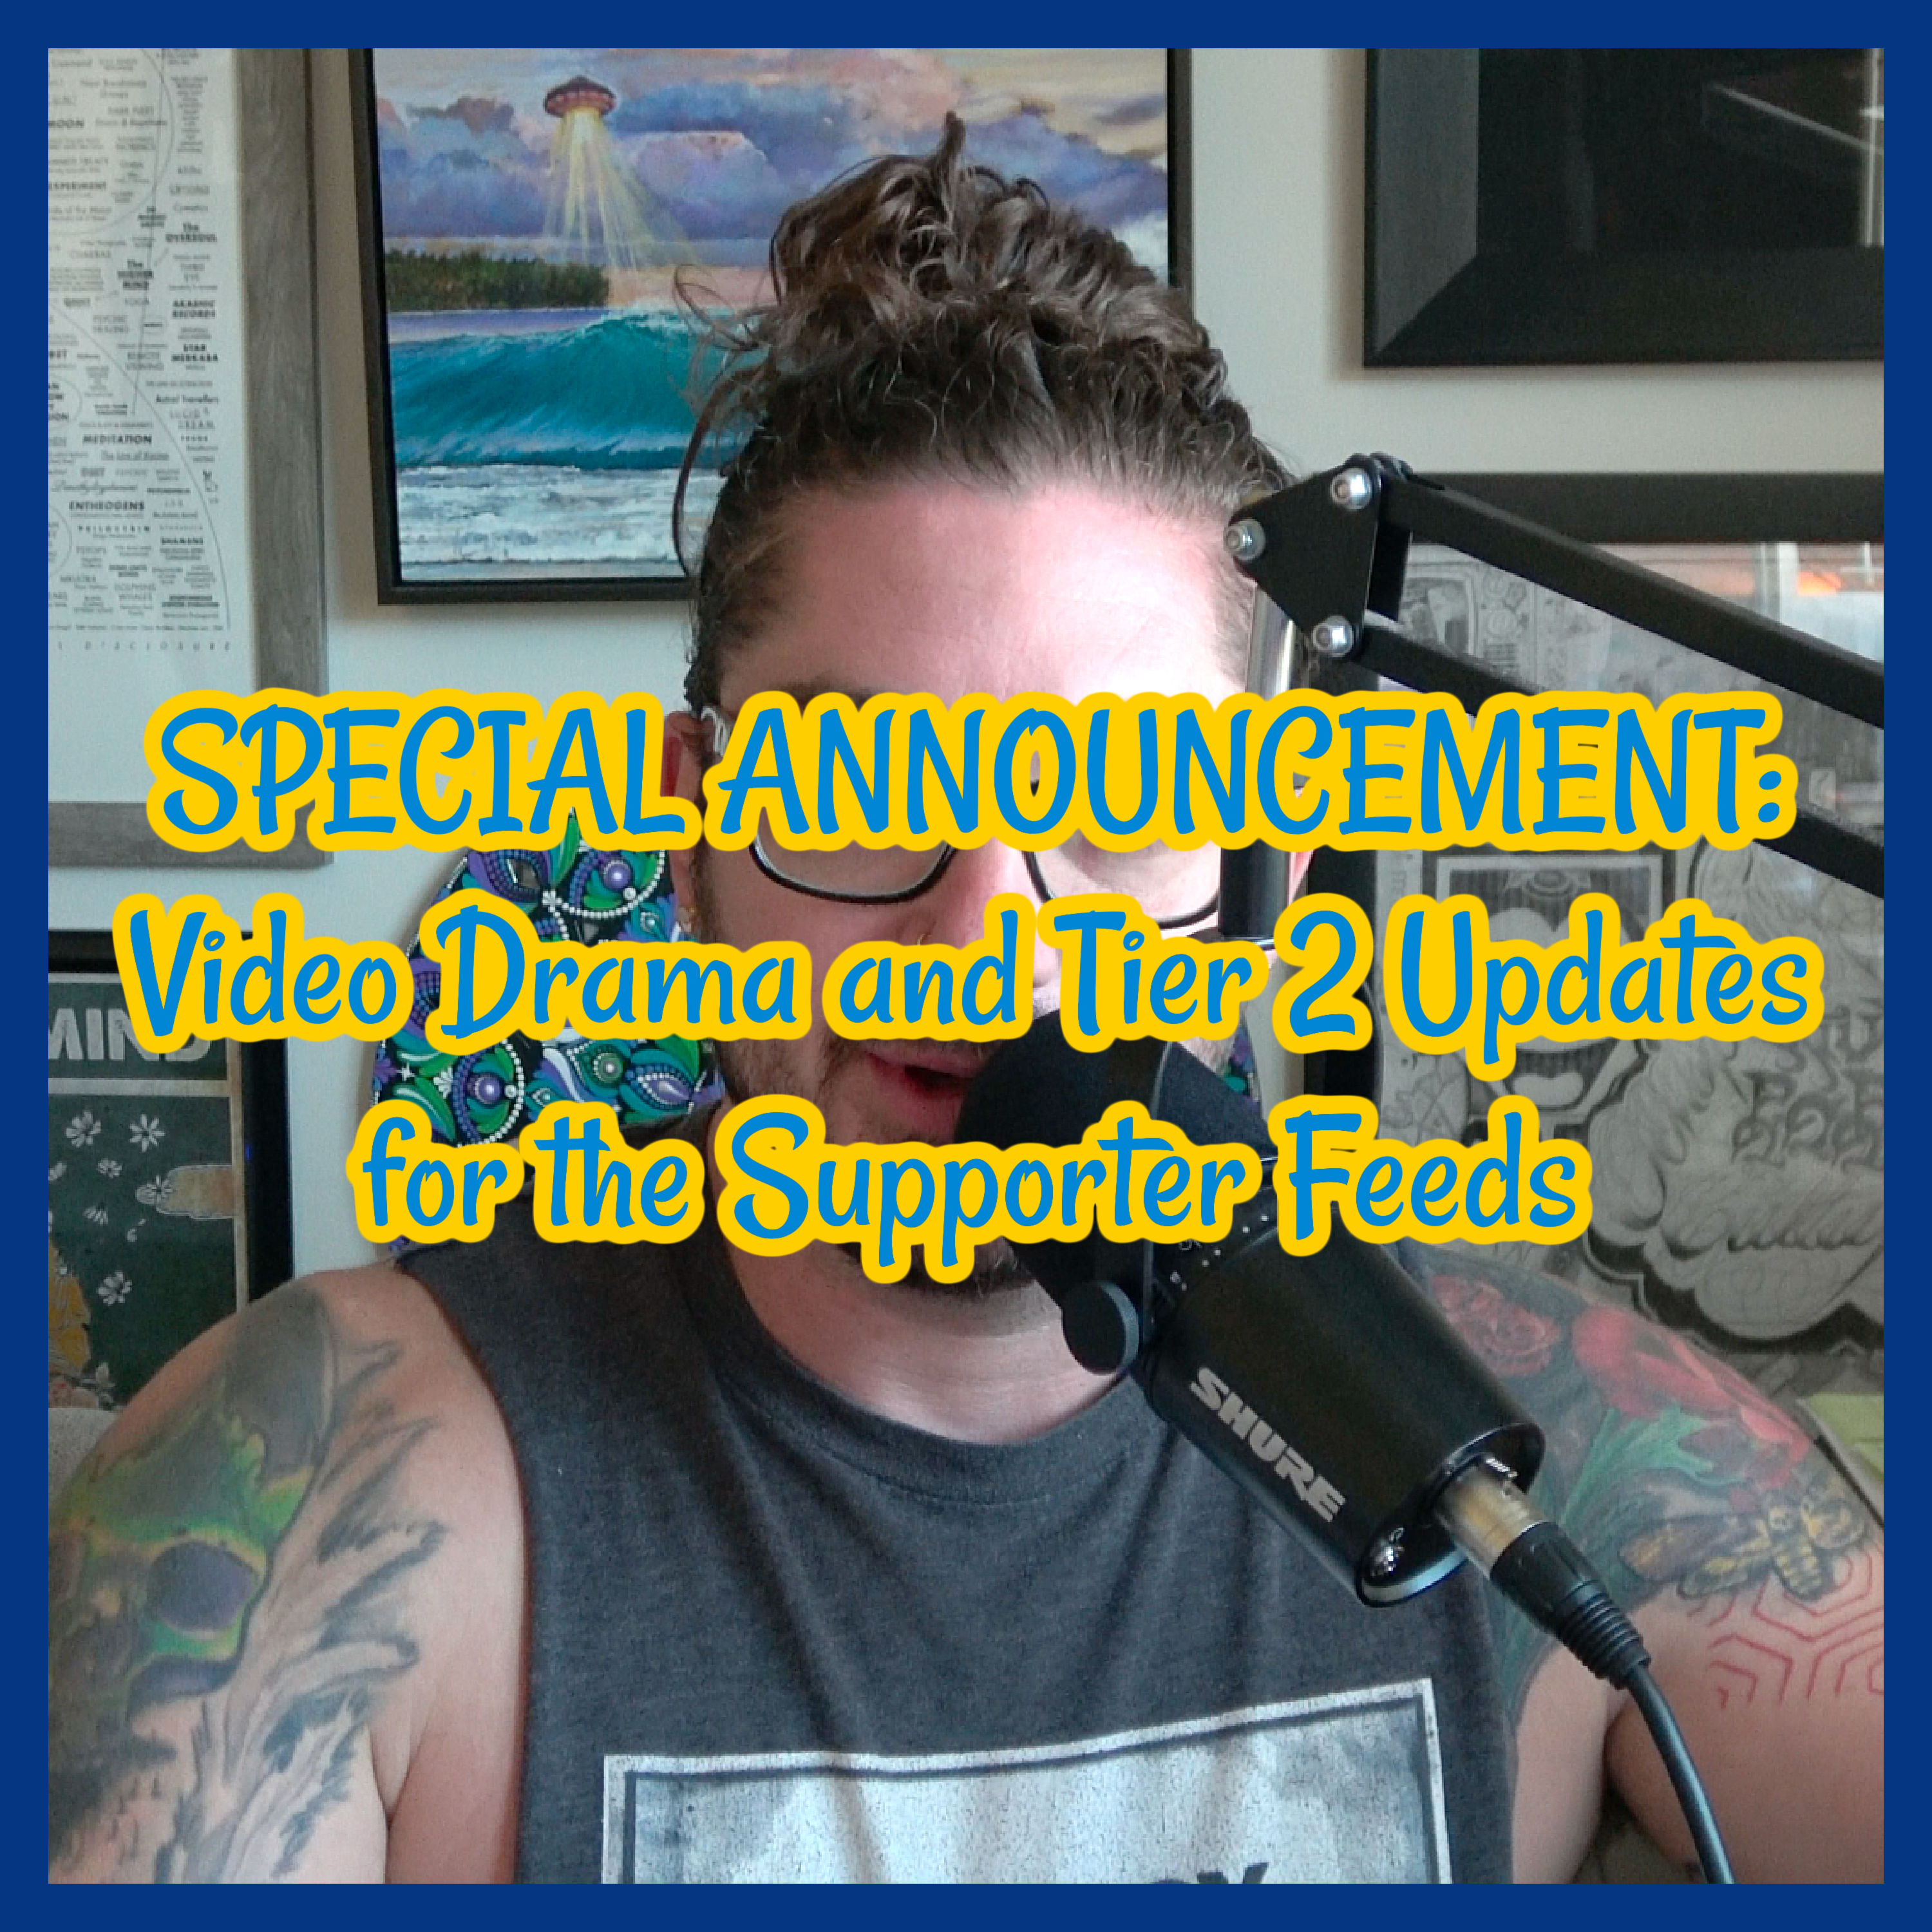 SPECIAL ANNOUNCEMENT: Video Drama and Tier 2 Updates for the Supporter Feeds